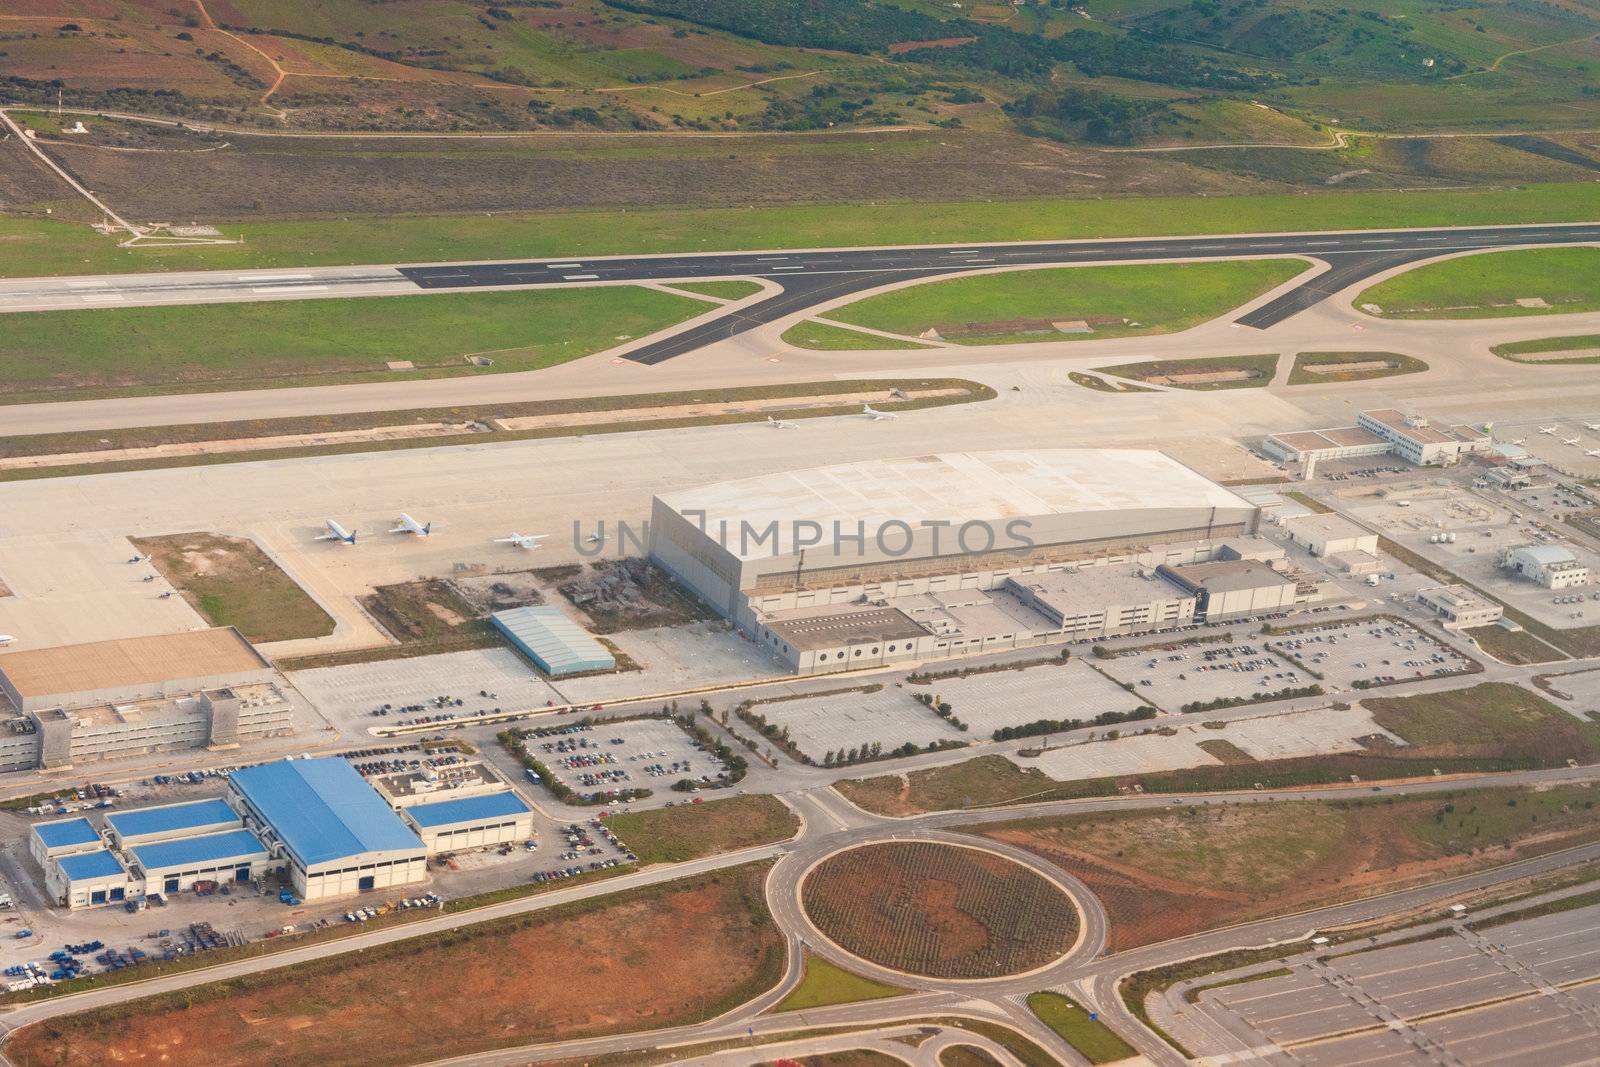 Aerial view of airport buildings, runways, taxiways, parking lots, airplane hangars and other infrastructure in Athens, Greece, Europe.